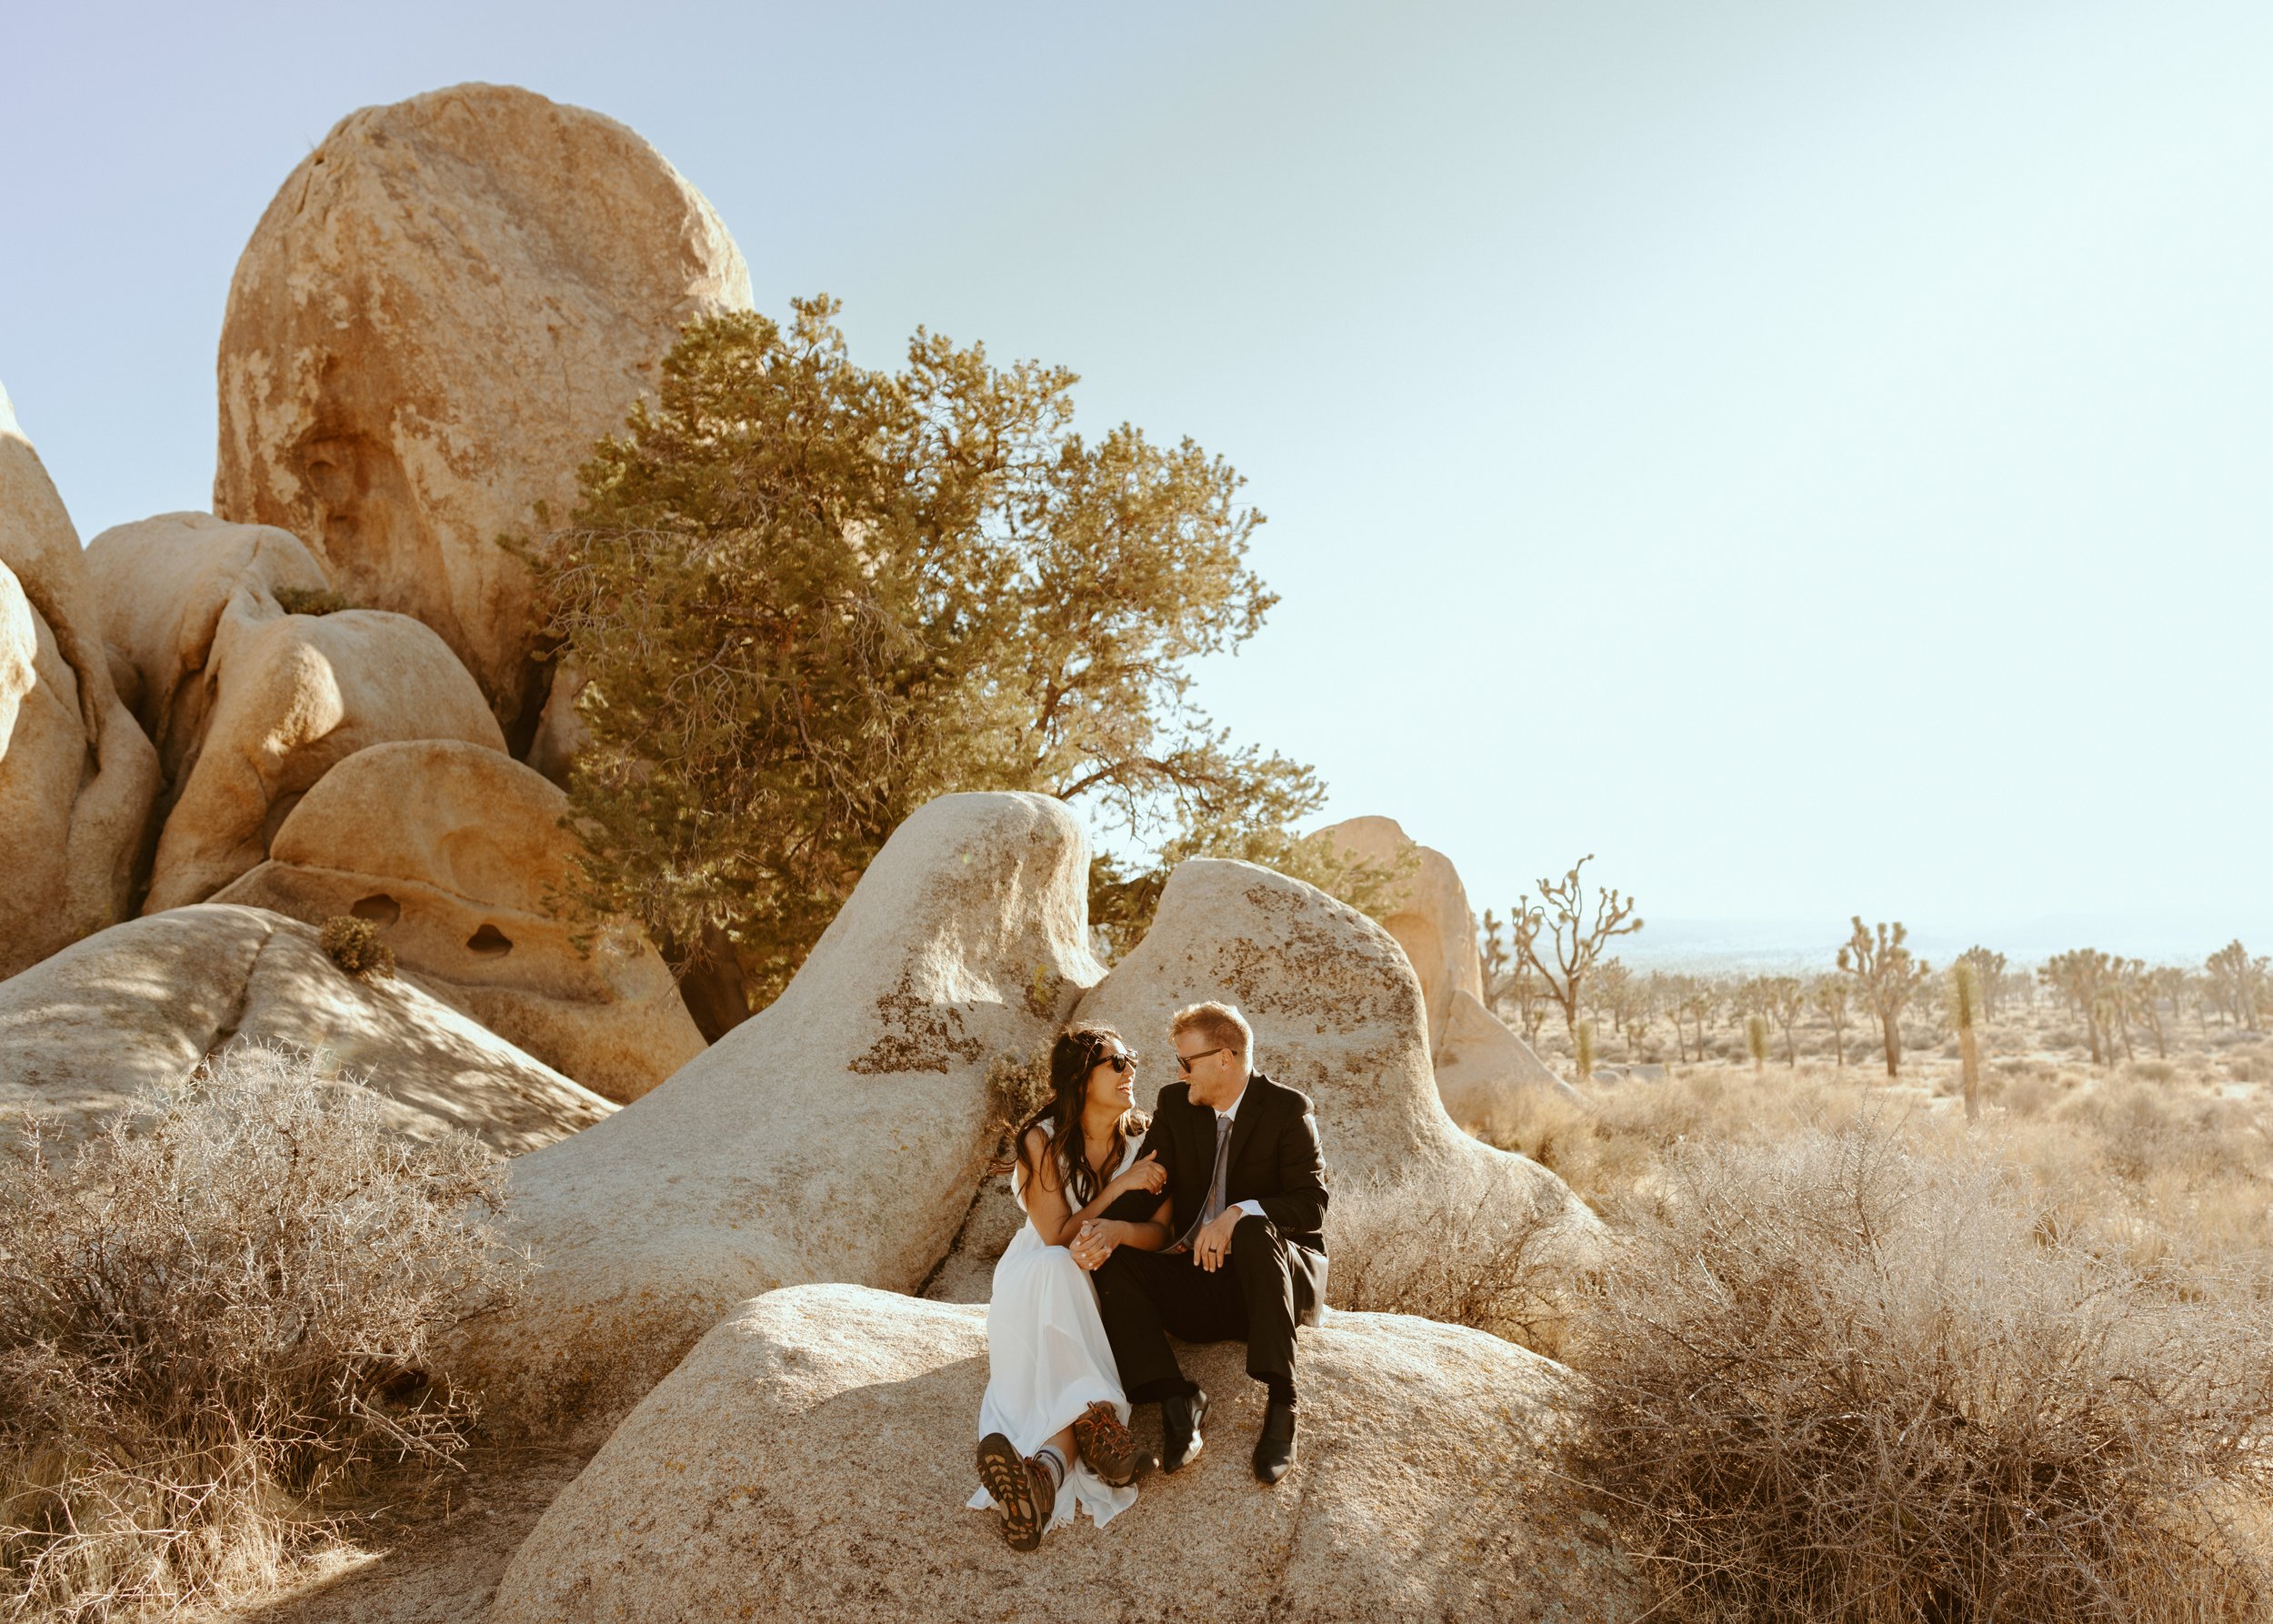 Best Engagement Session Locations in Southern California - Joshua Tree National Park  | California Wedding Photographer